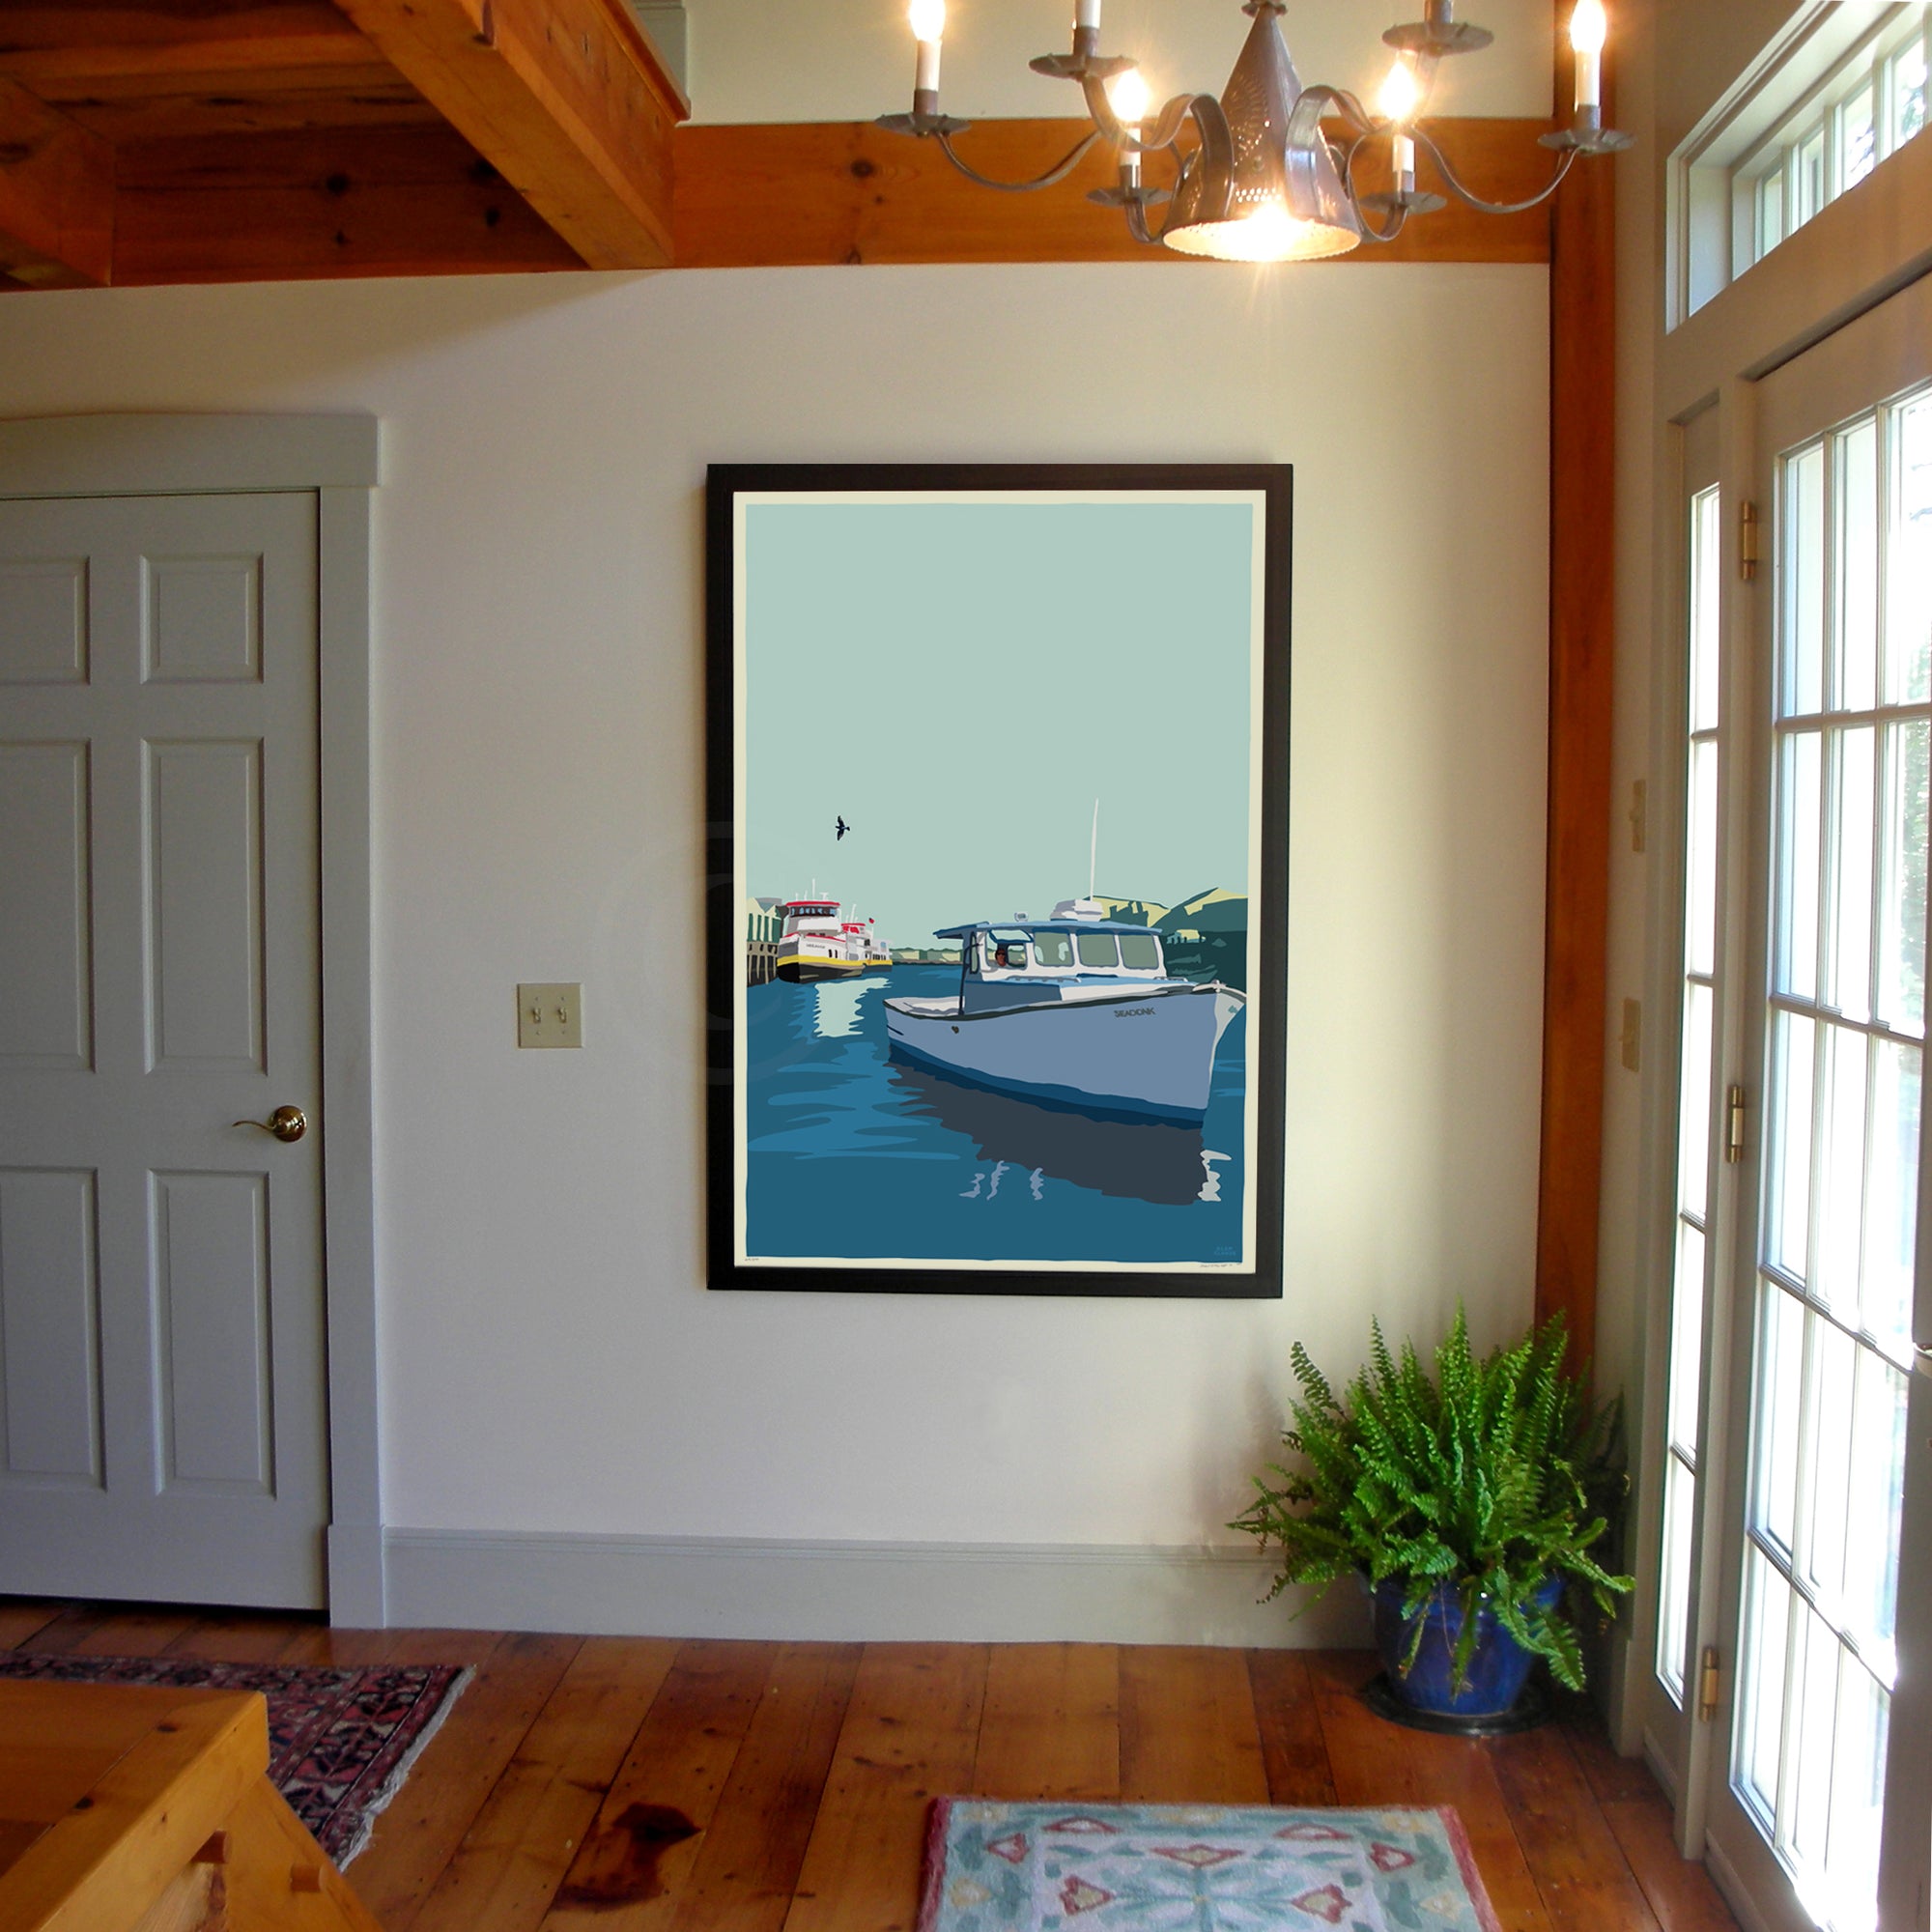 Coming Home Art Print 36" x 53" Grand View Framed Wall Poster - Maine